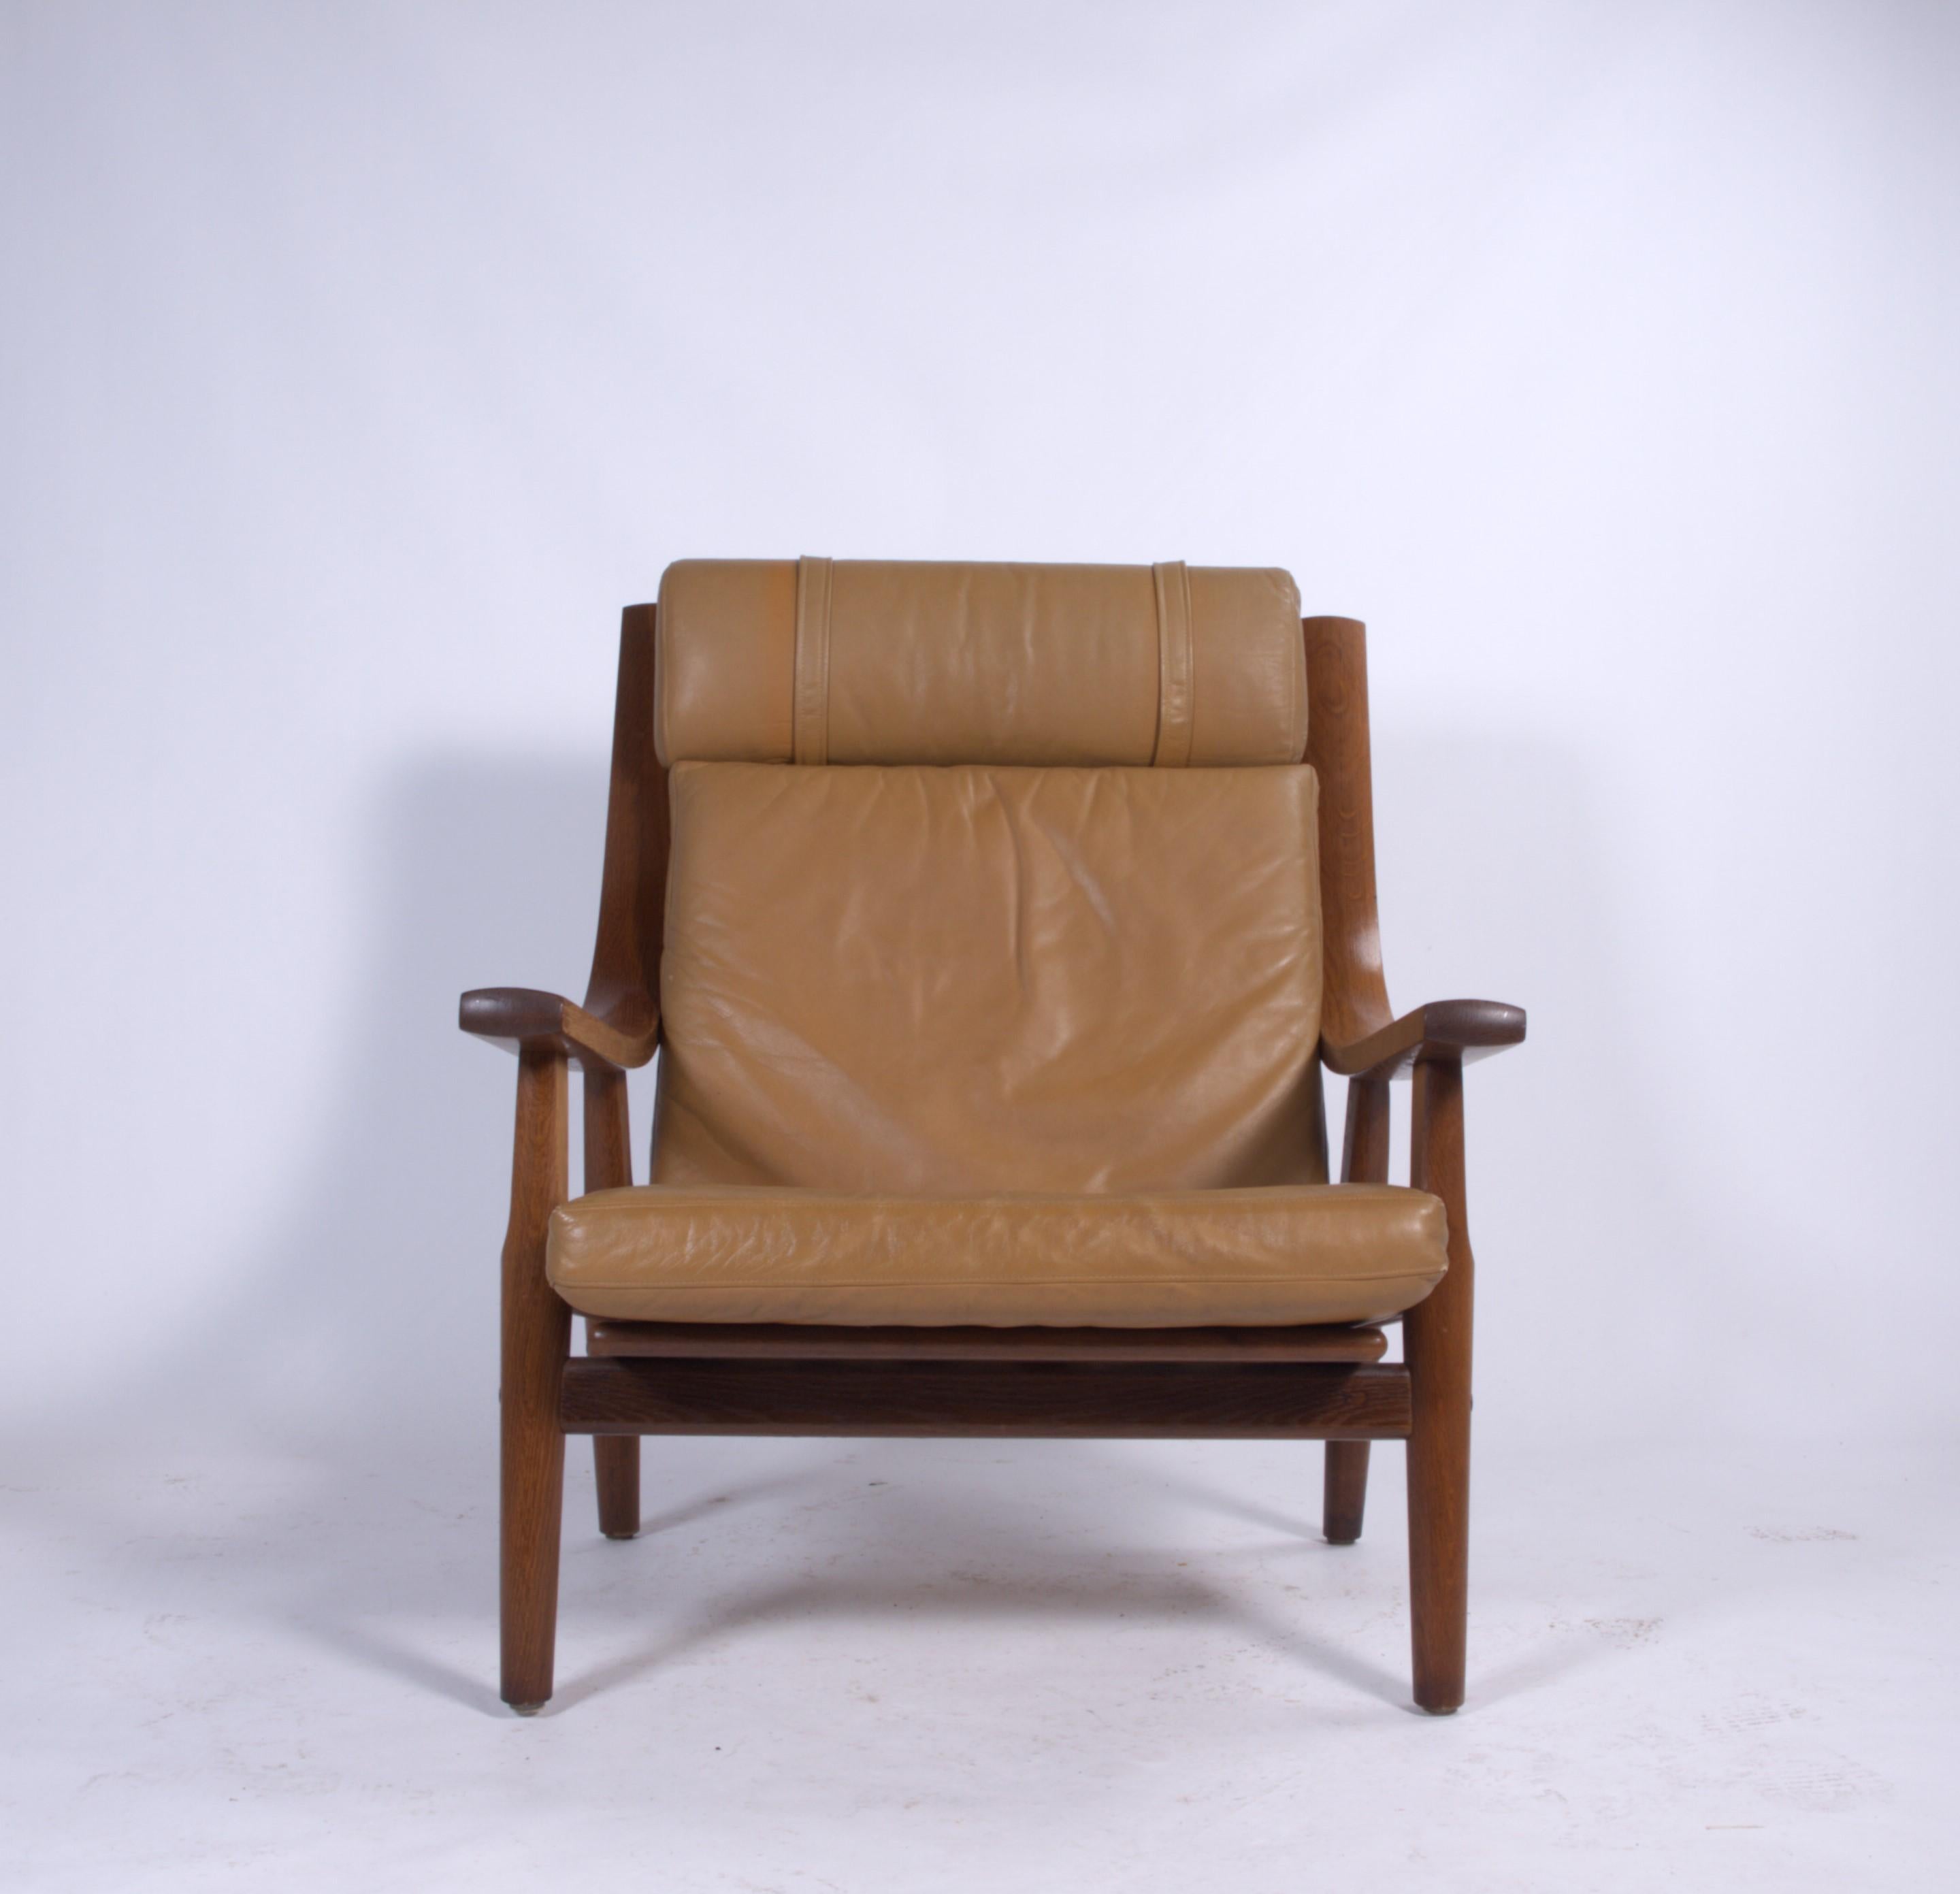 Looking for a piece of Danish design history to add to your collection? Look no further than this stunning lounge chair designed by Hans J. Wegner for Getama in the 1960s-1970s. Made in Denmark, this vintage classic is a must-have for any design